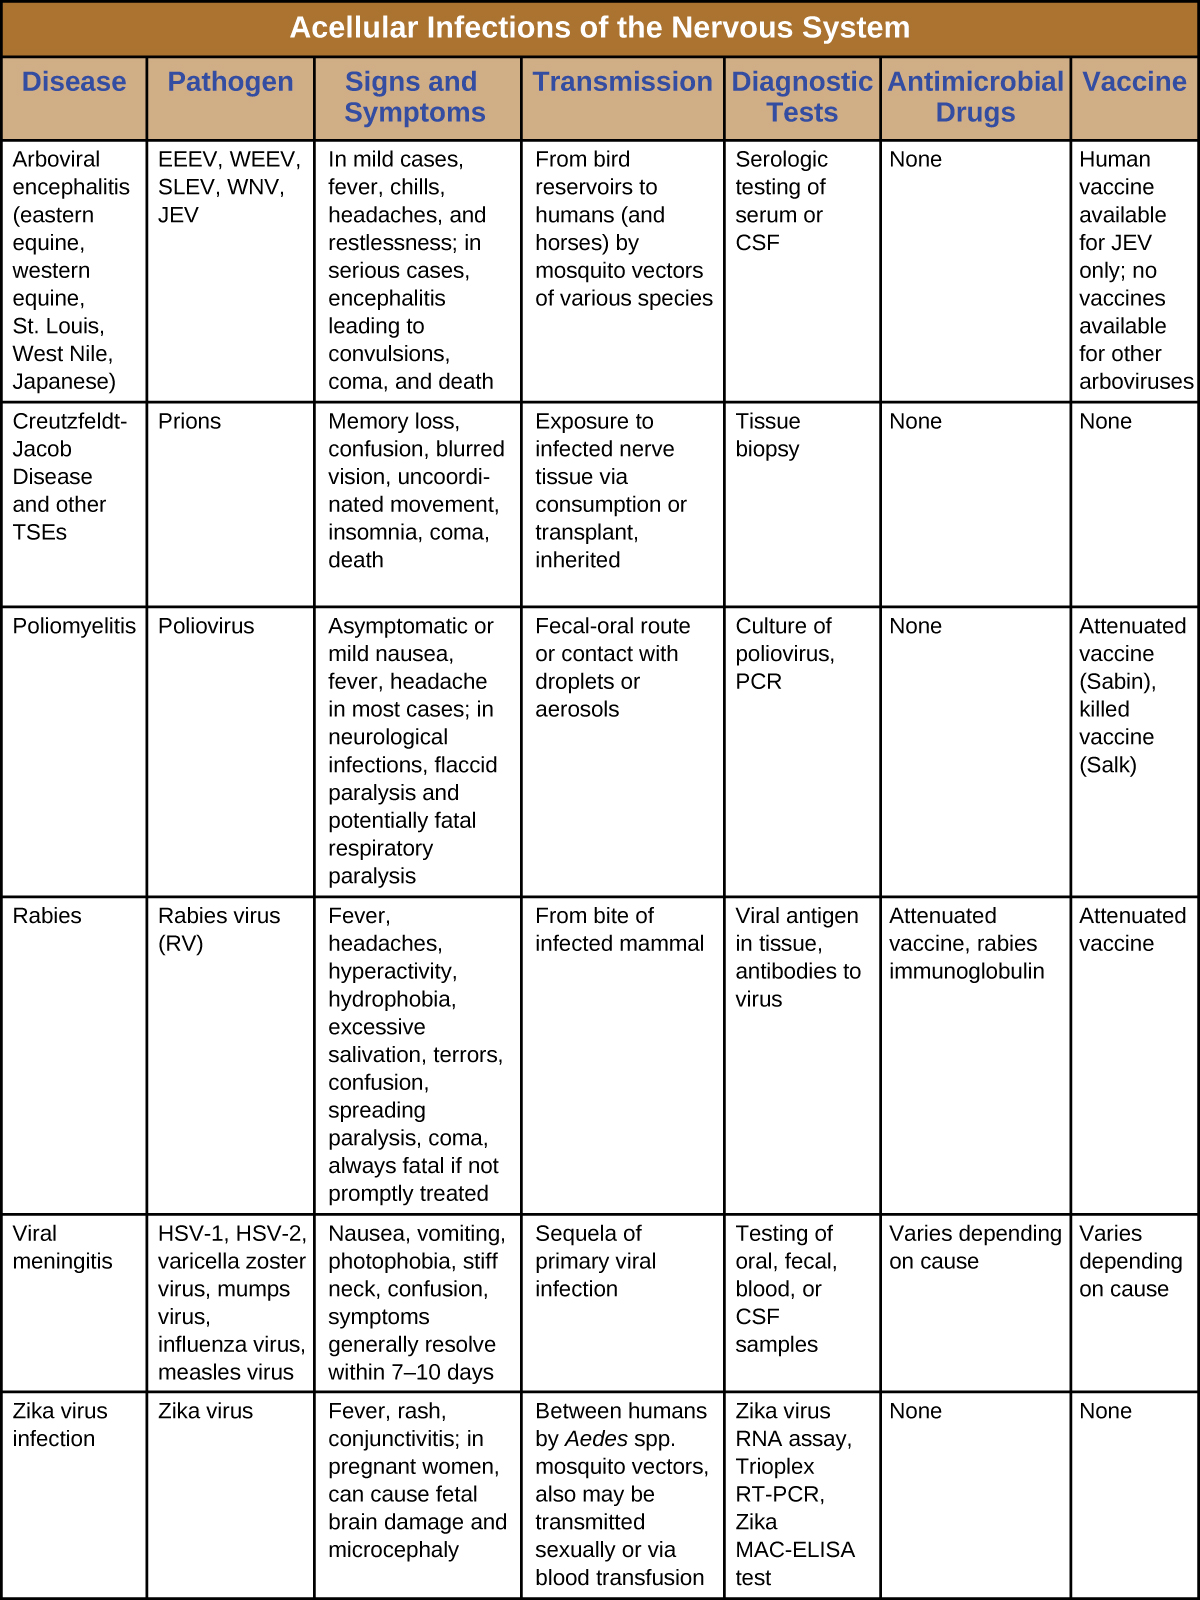 Table summarizing the acelllular diseases of the nervous system